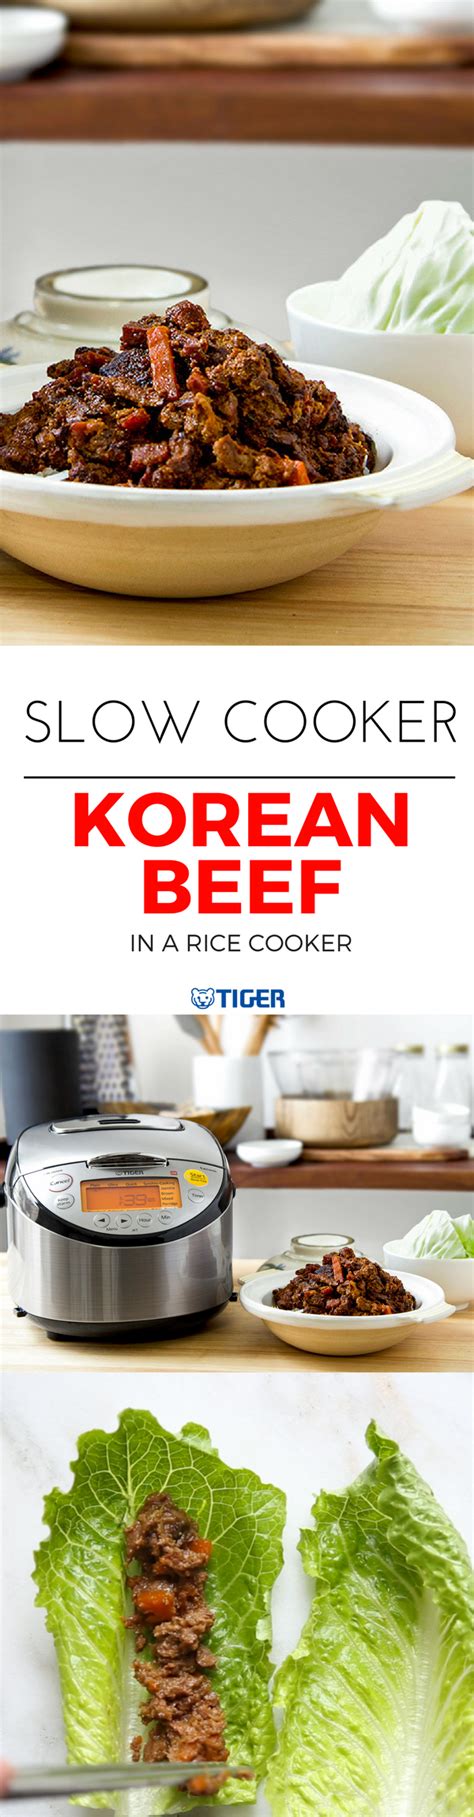 Bring a big pot of water to boil, add salt, cardamom pods, cinnamon stick and cloves plus 2 tbsp put the rice back into the empty pan and sprinkle a handful of fried onions and some chopped fresh hi! Slow Cooker Korean Beef - TIGER CORPORATION U.S.A. | Rice ...